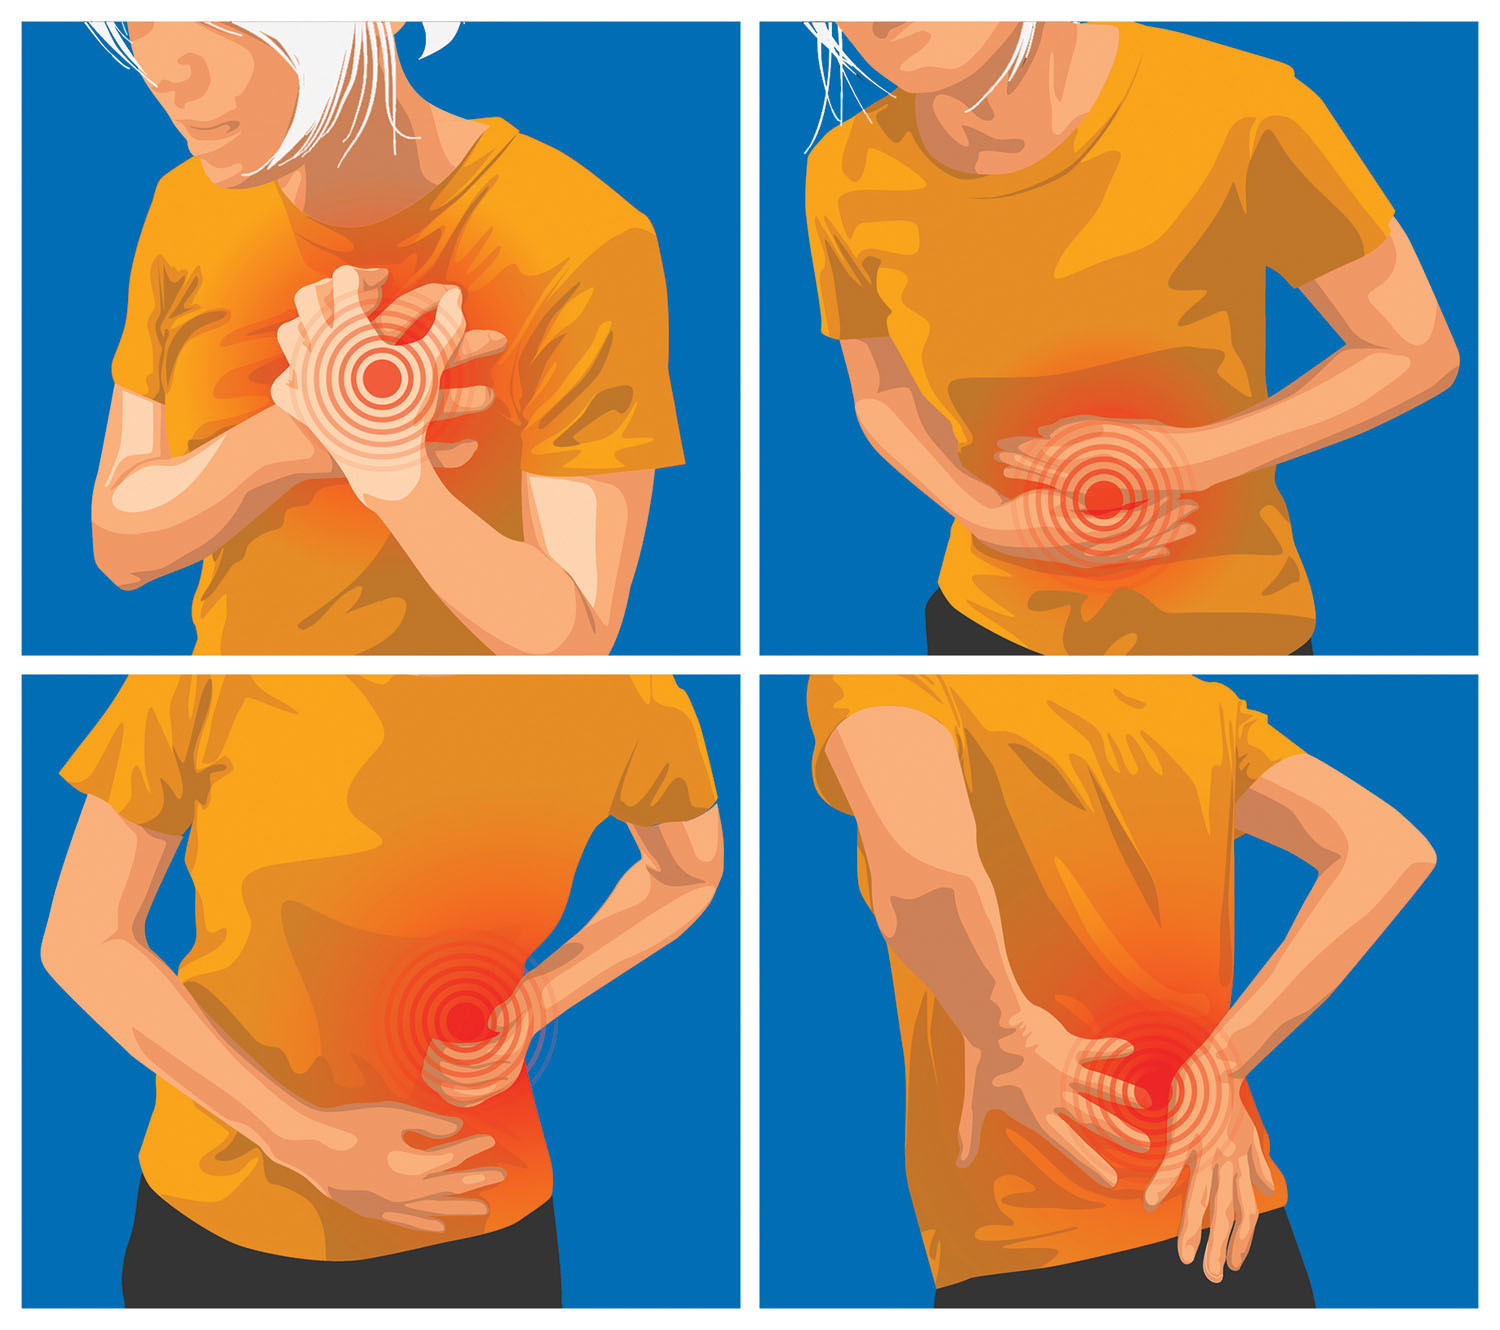 illustration with four squares showing pain in different areas of the body: chest, abdomen, back, side